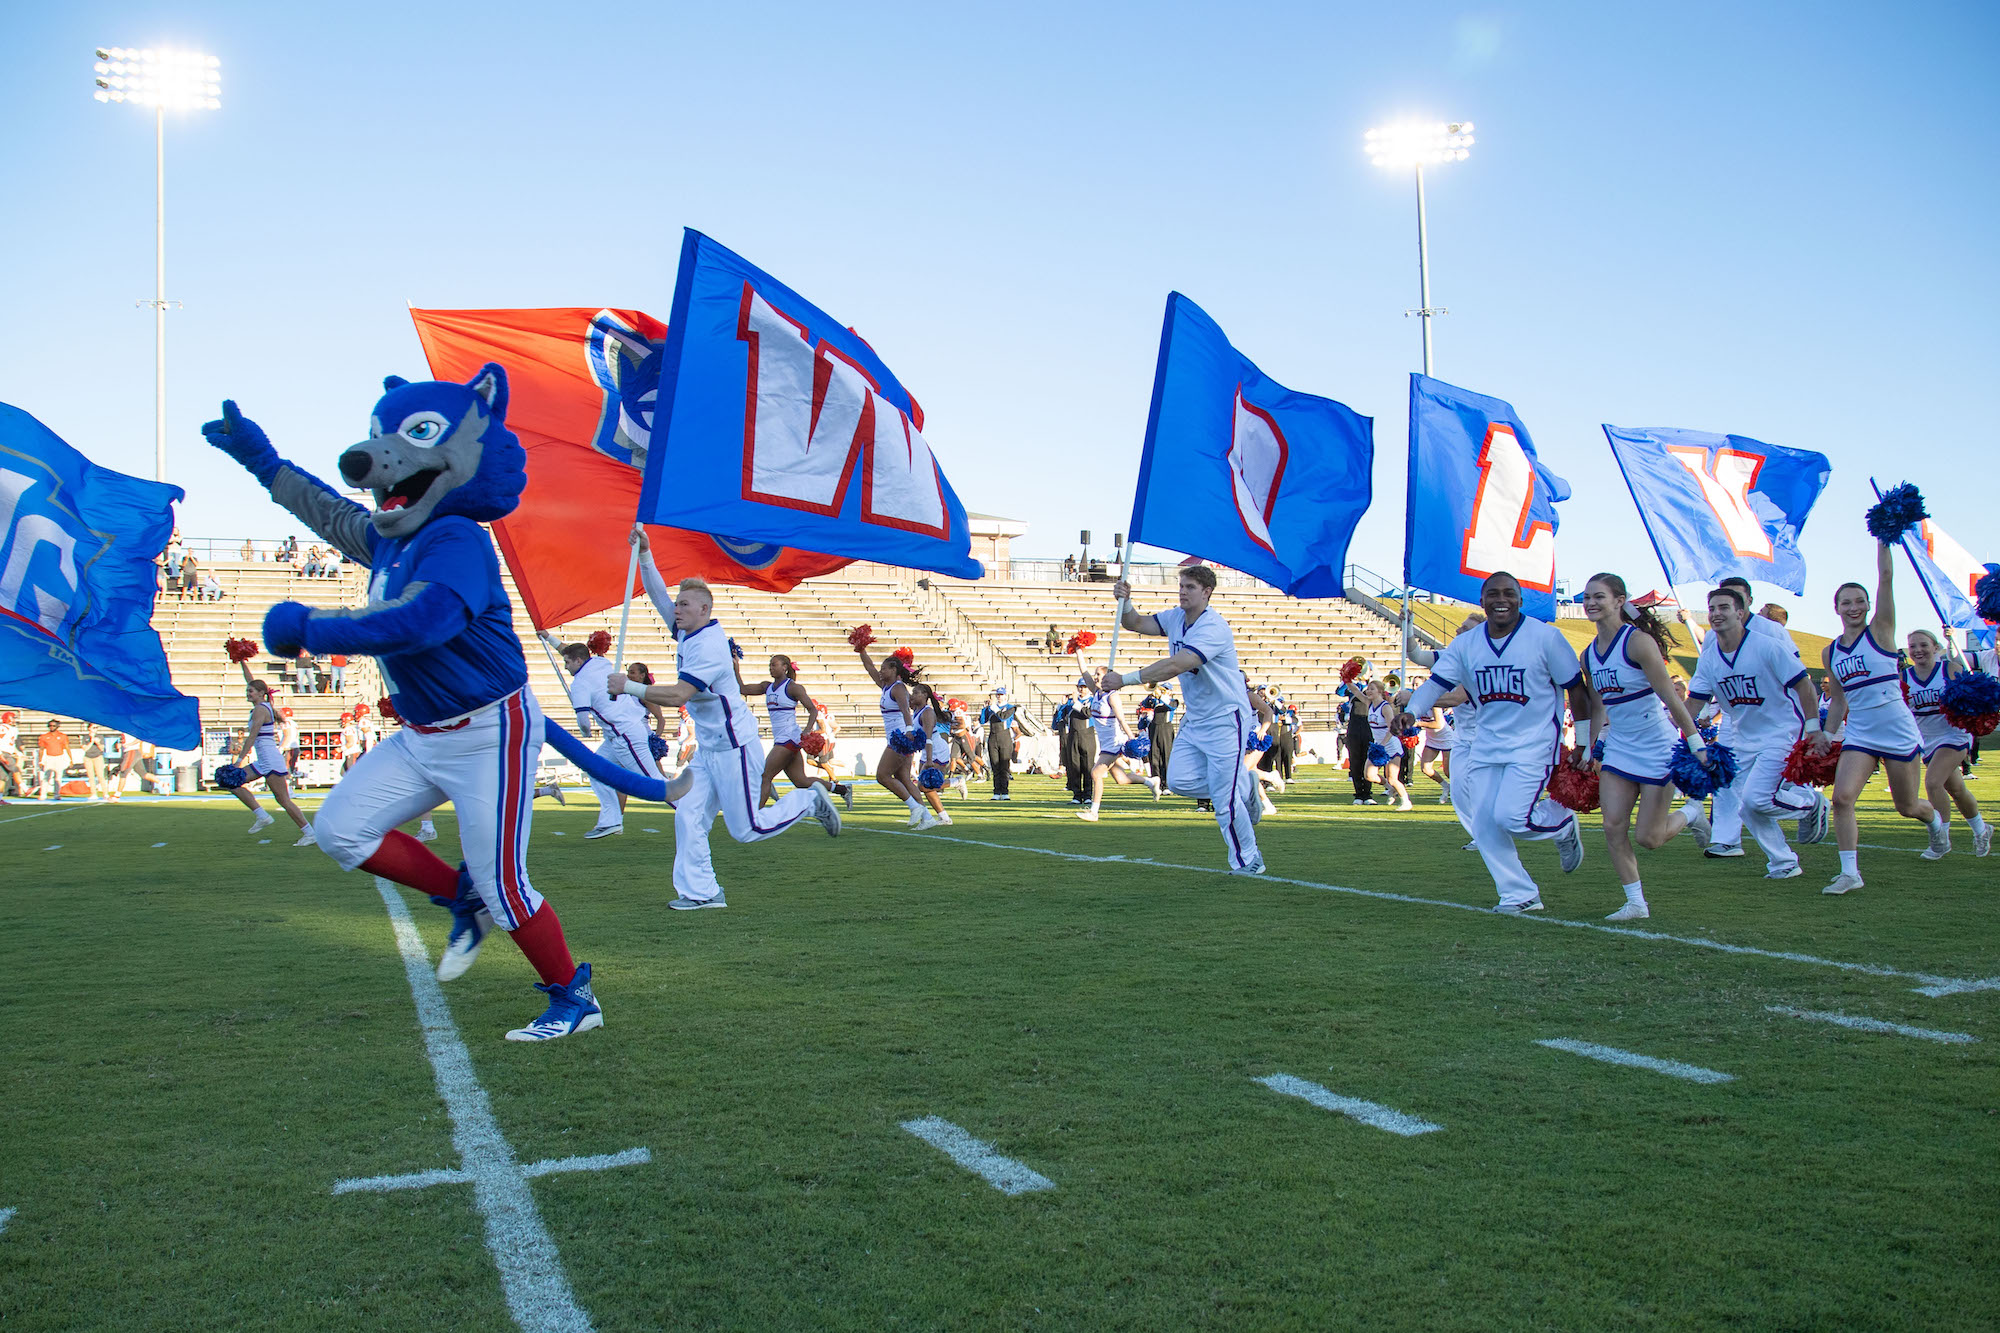 Wolves storm the field with UWG flags